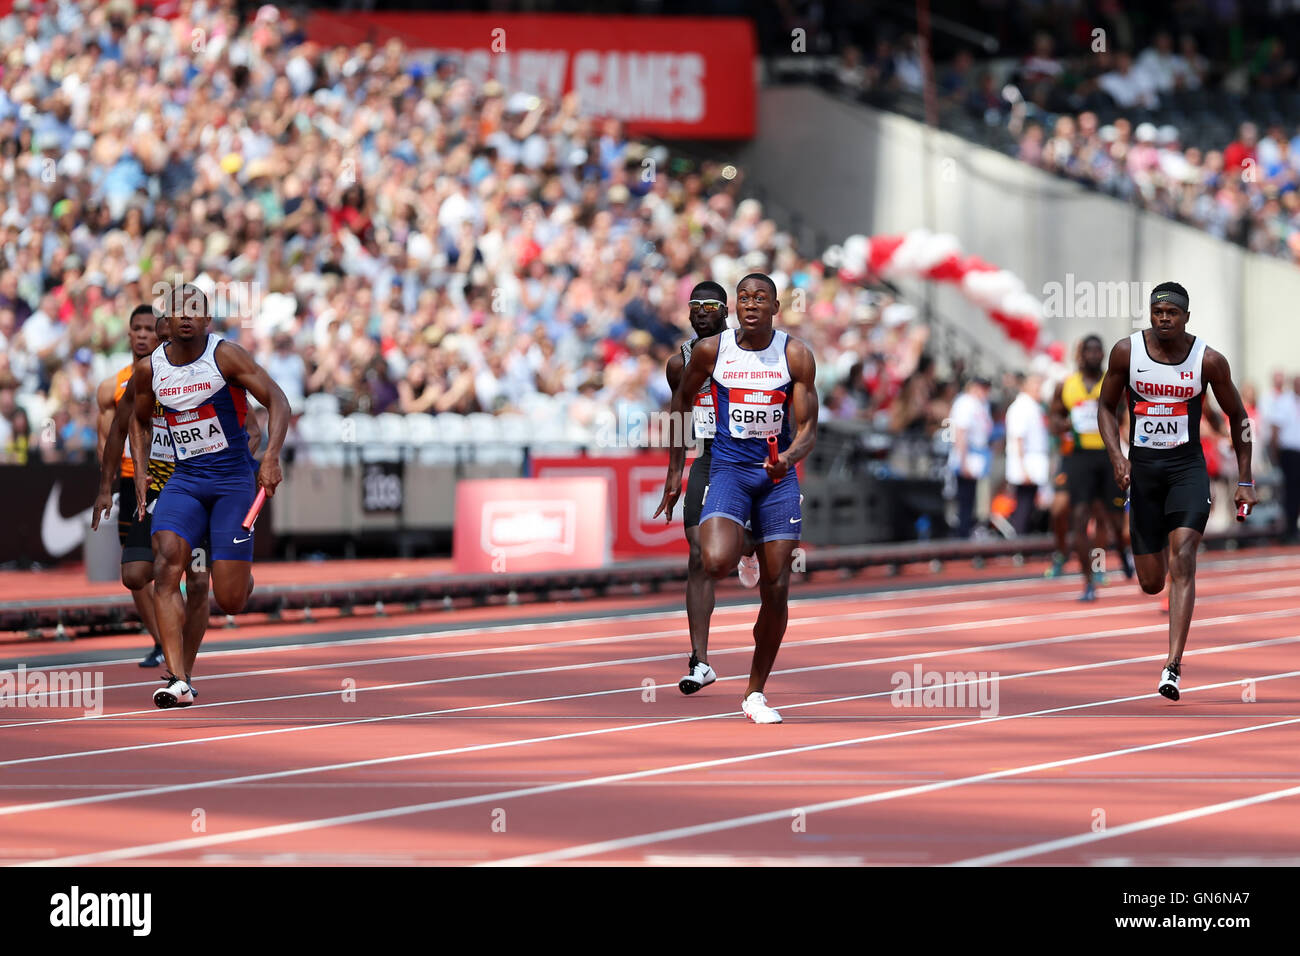 Ojie EDOBURUN running the final leg for Team GBR B & Chijindu UJAH running the final leg for Team GBR A, in the Men's 4x100m relay, at the IAAF Diamond League London Anniversary Games, Queen Elizabeth Olympic Park, Stratford, London, UK. Stock Photo